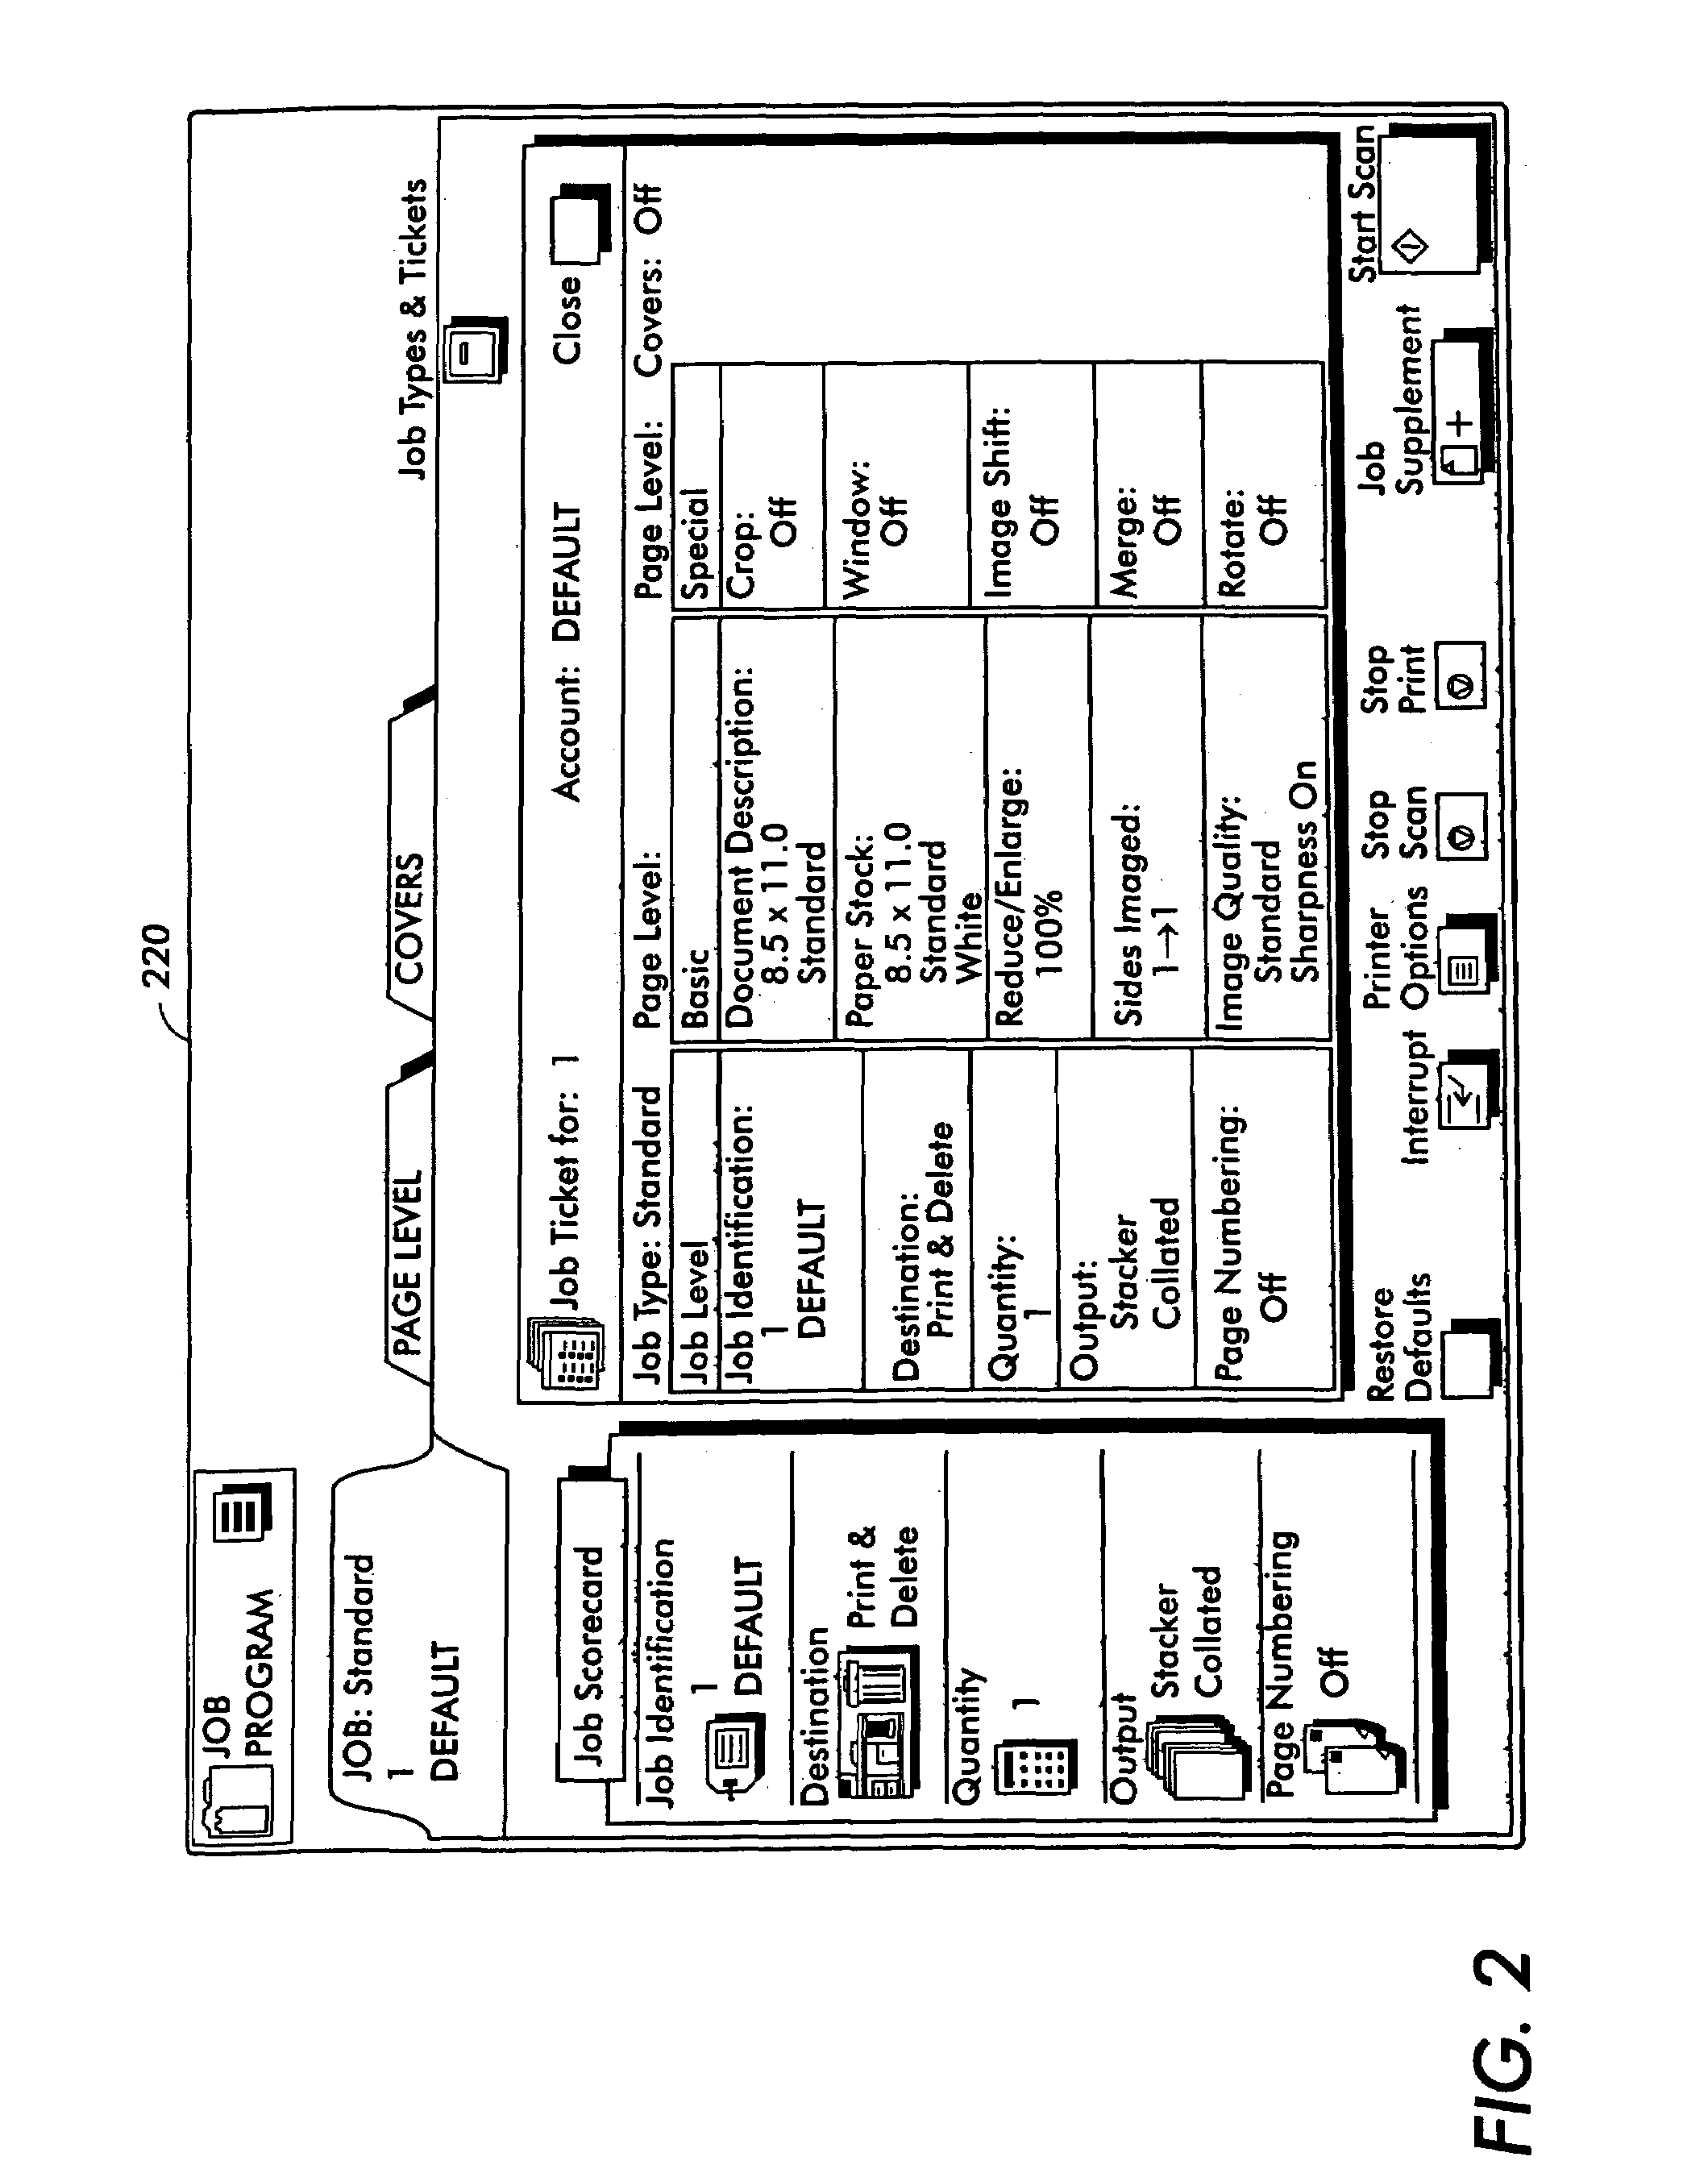 Systems and methods for rapid processing of raster intensive color documents